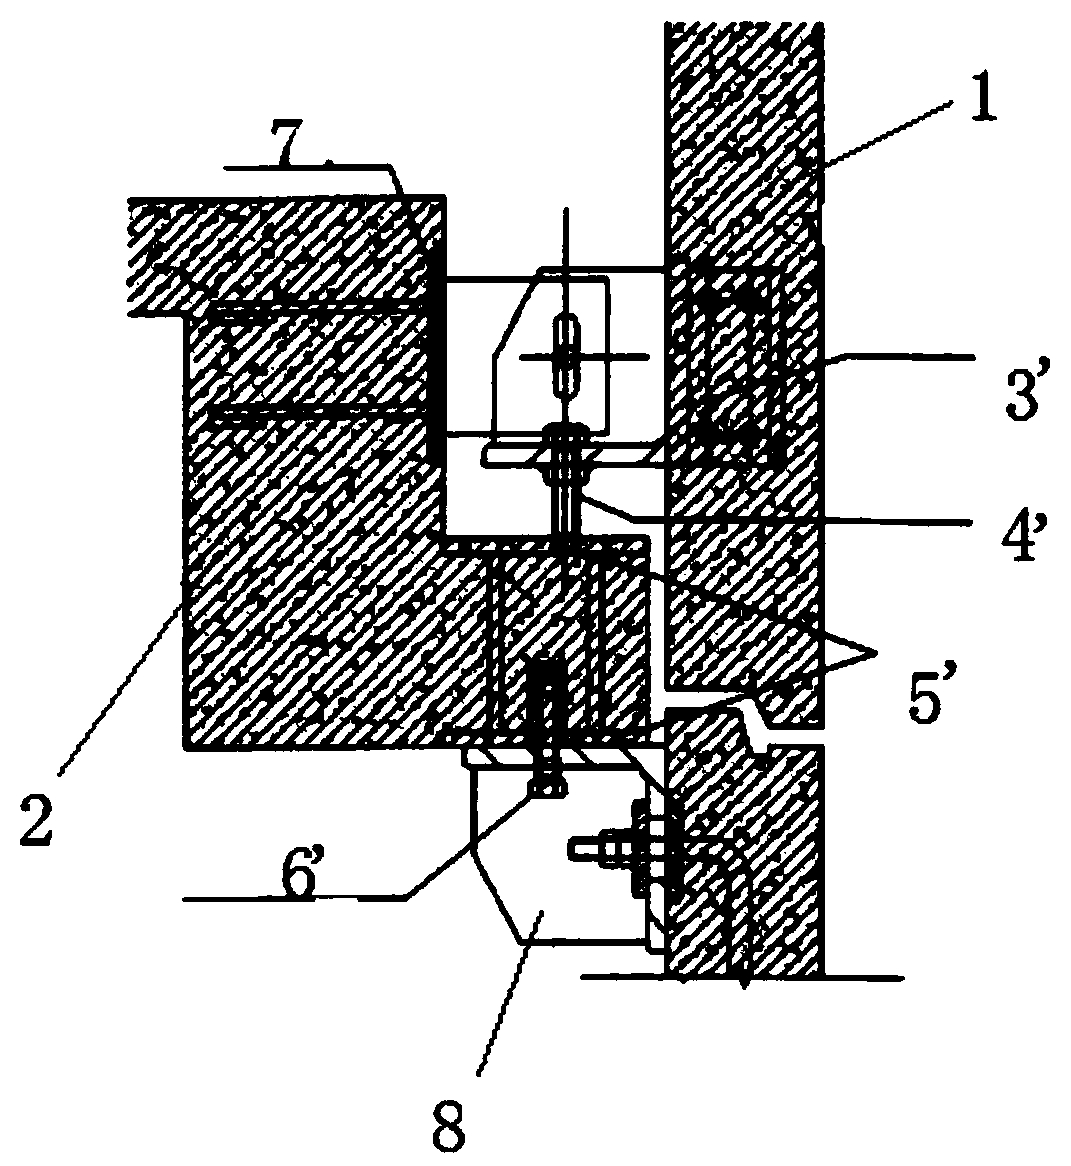 Concrete outer hanging plate hoisting construction method